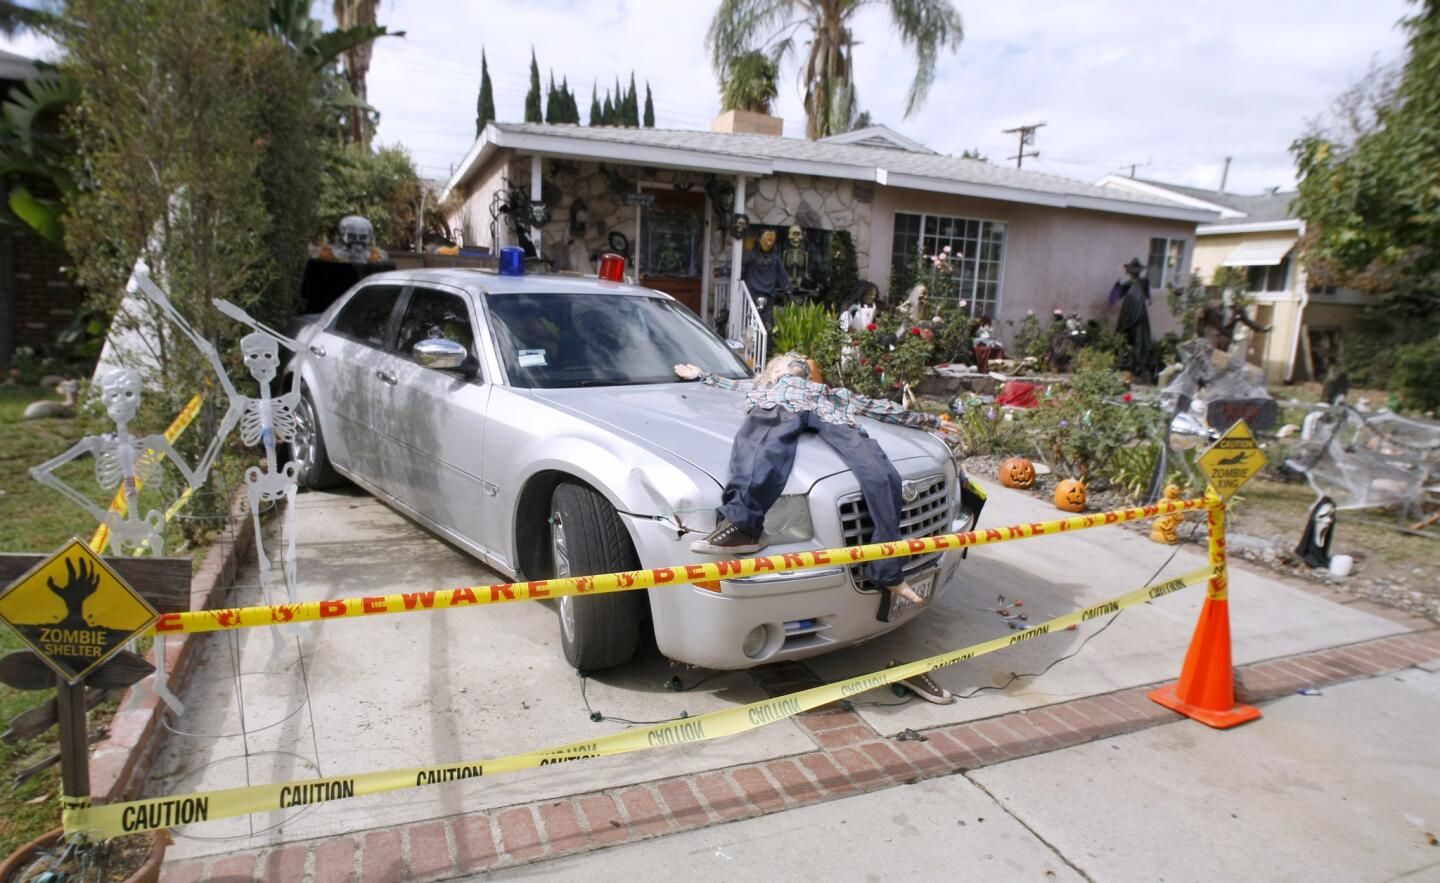 Tina Schaefer and Arnulfo Padilla decorated the home, winner of the Burbank Halloween Decorating Contest, at 1505 N. Valley St. in Burbank, shown on Friday, October 28, 2016. There are a variety of scary scenes throughout the front yard, which include a scary clown and a gorilla driving a car that has hit a character. The display also includes actual skeletal remains of a boar.